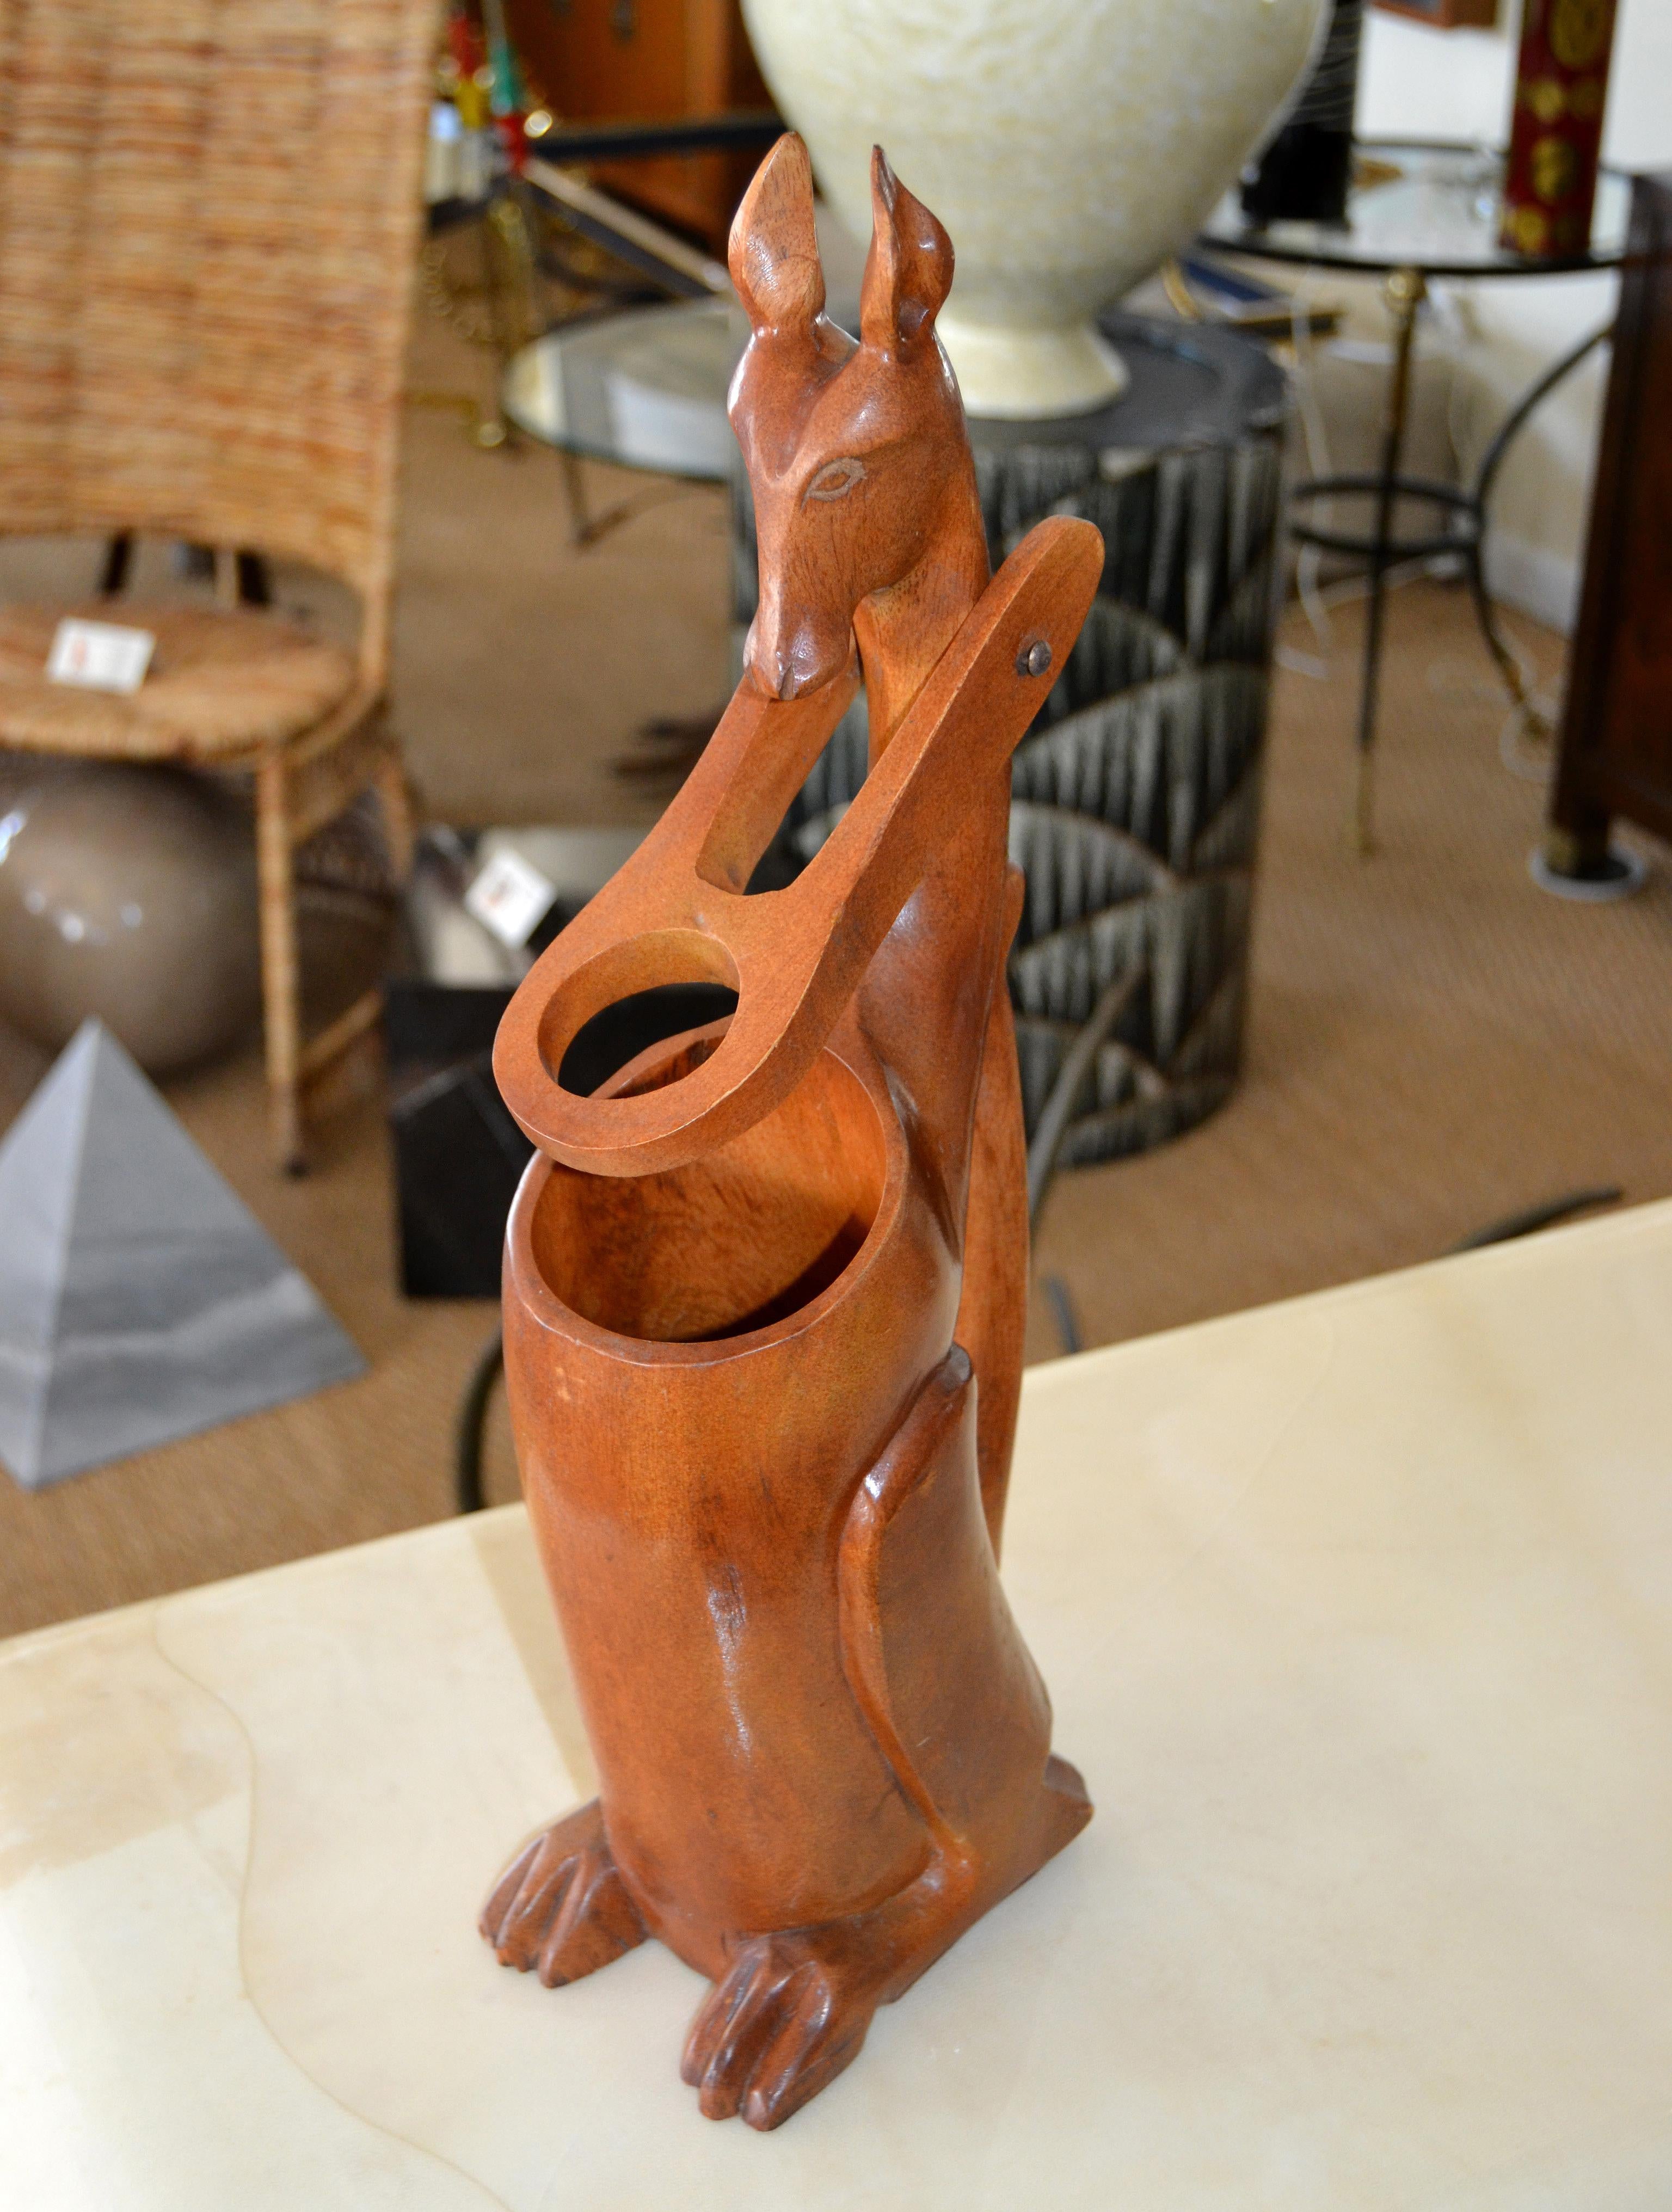 We offer a 1950s hand carved wooden kangaroo wine bottle holder, pourer or dispenser.
Made out of one piece of wood with lovely details.
  